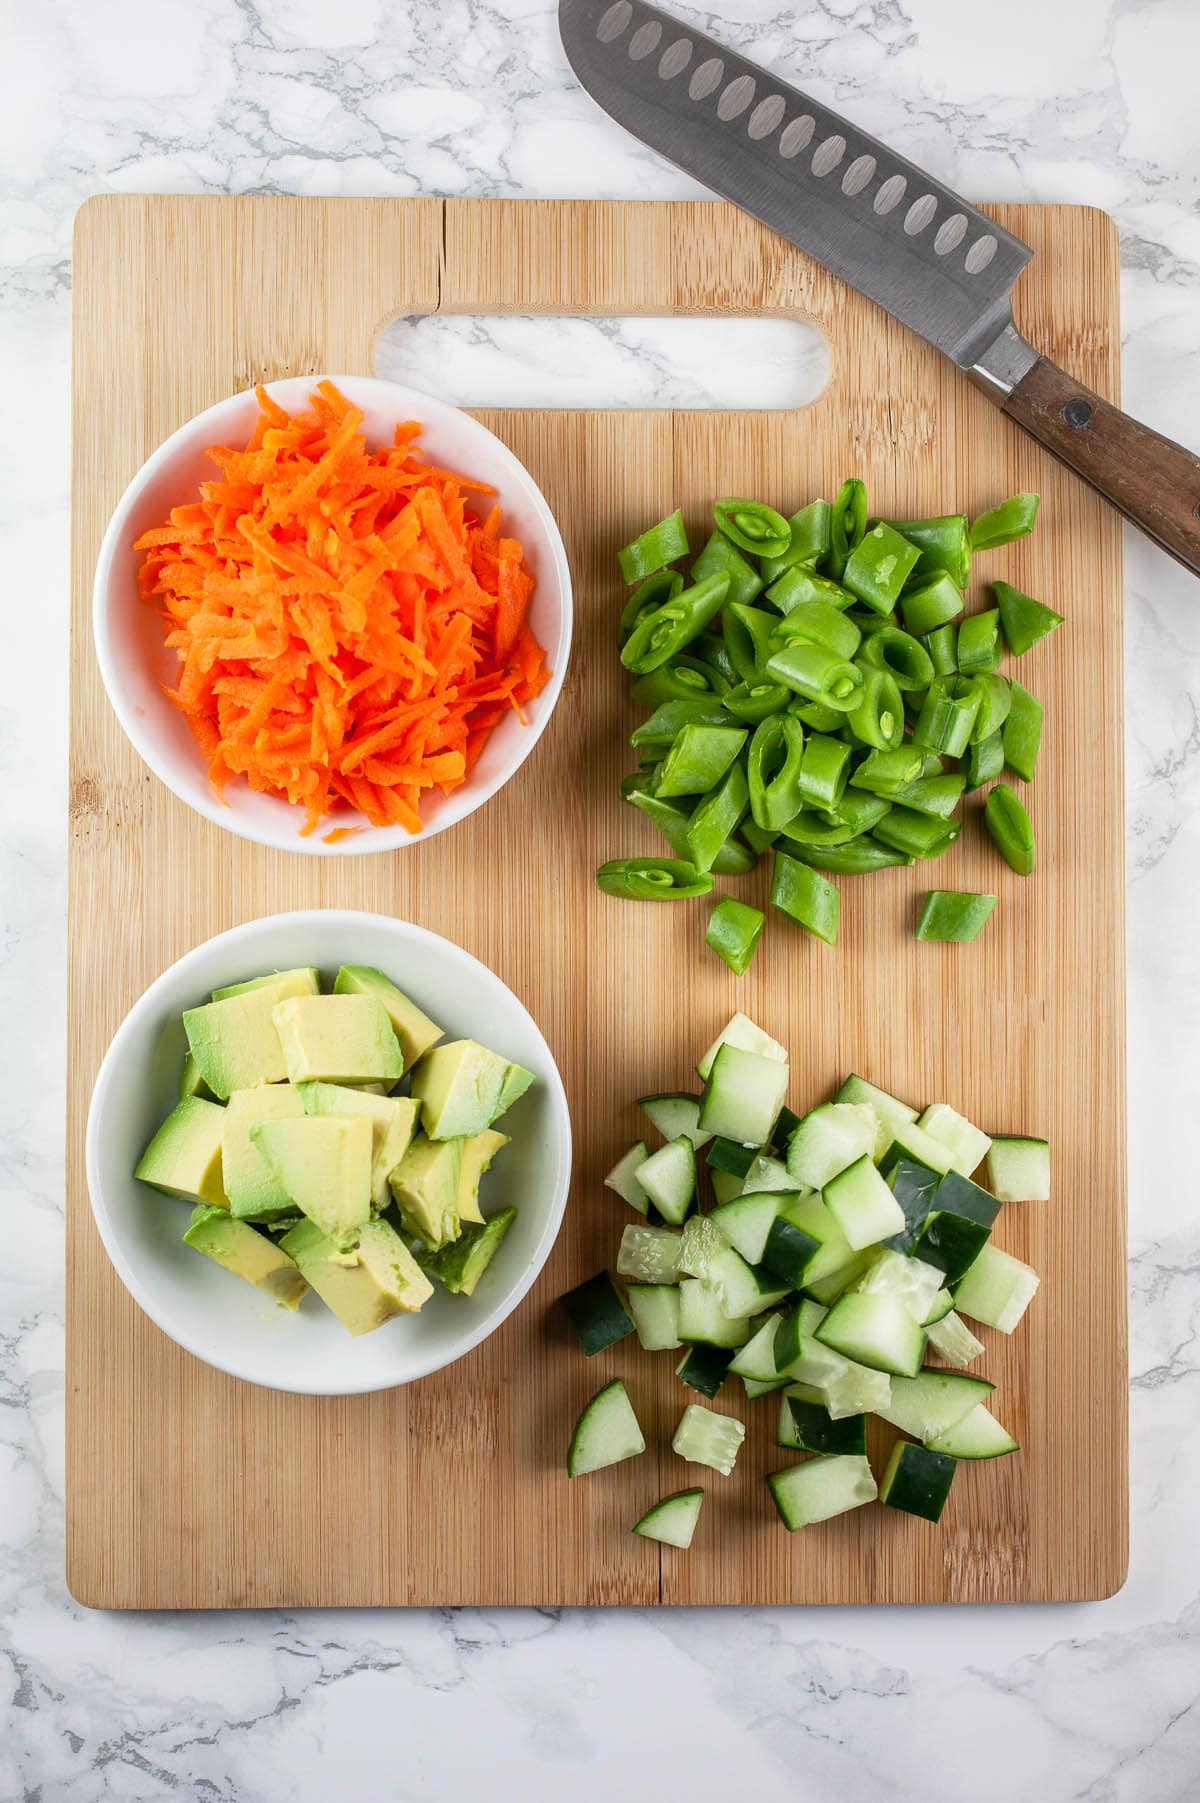 Diced avocado, cucumbers, snap peas, and grated carrots on wooden cutting board with knife.